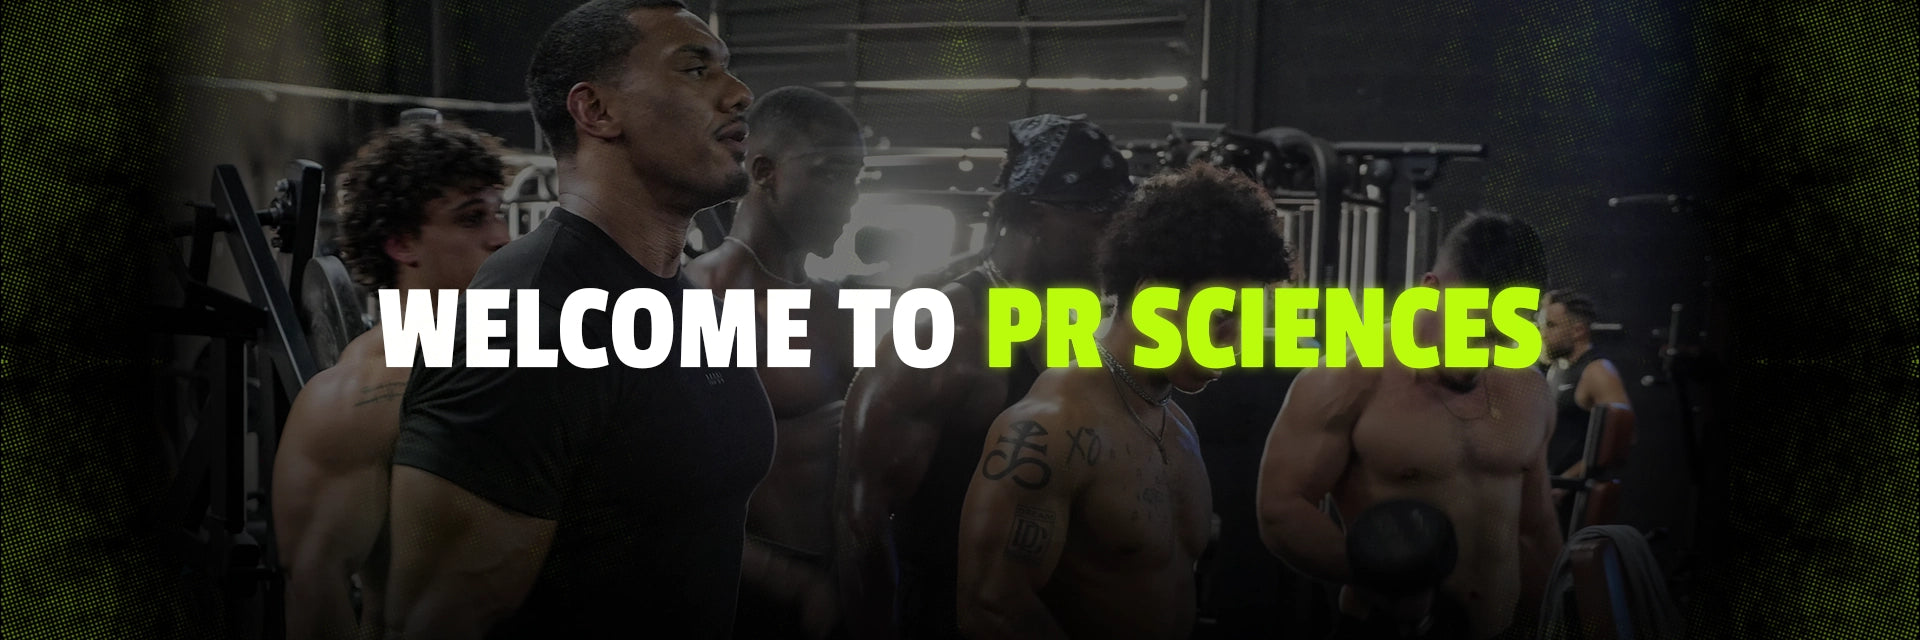 Welcome to PR Sciences. Larry Wheels team